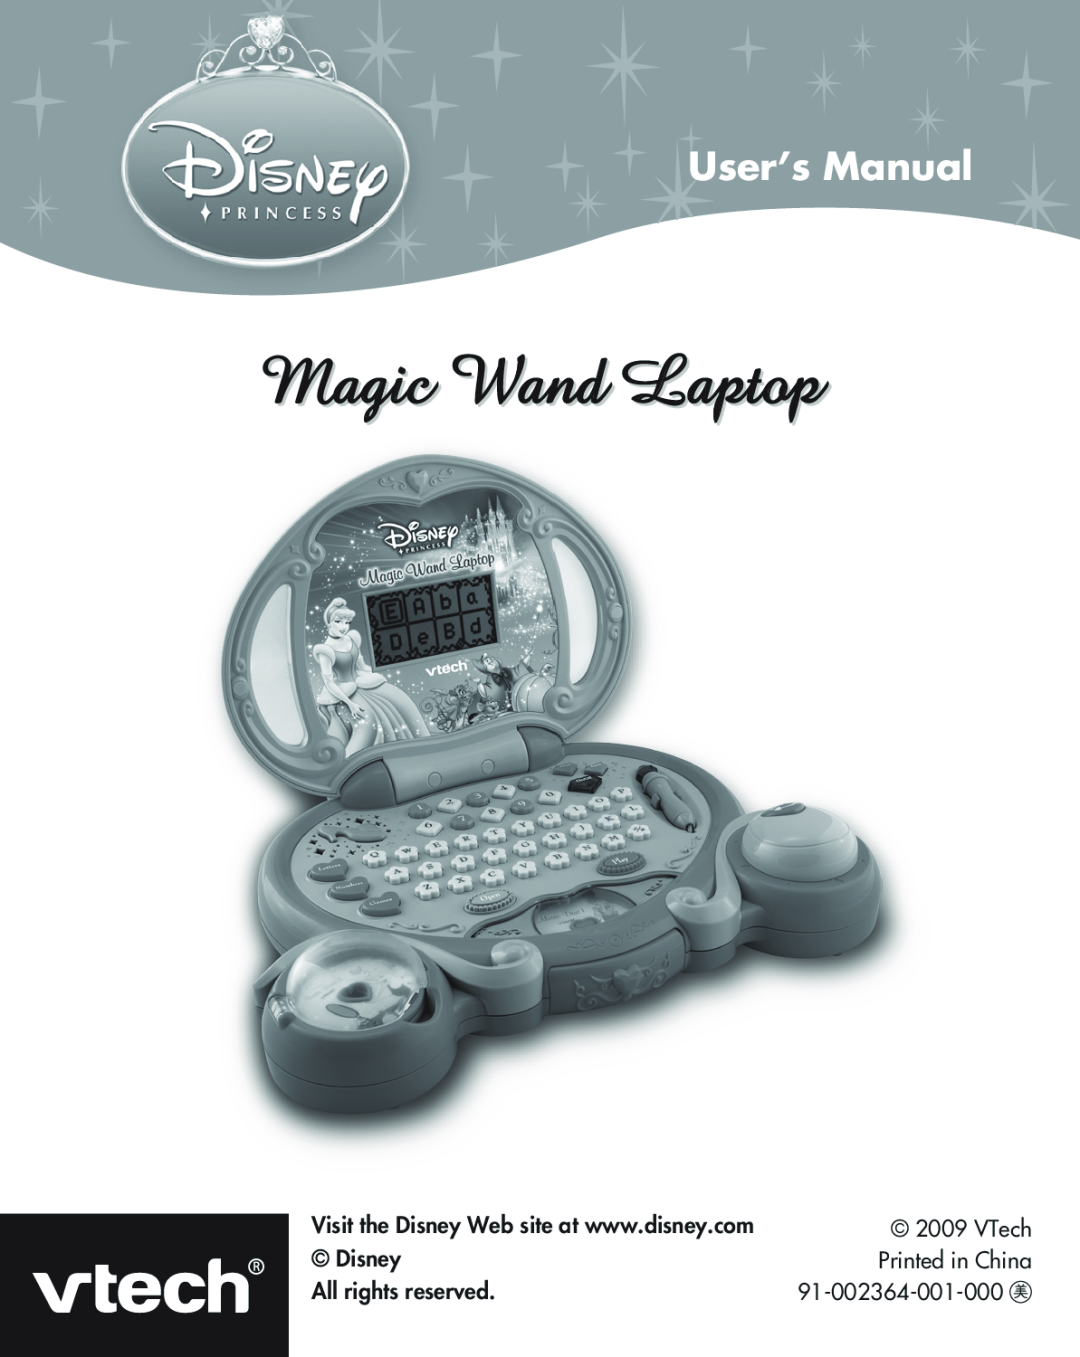 VTech 91-002364-001-000 user manual Magic Wand Laptop, User’s Manual, All rights reserved 